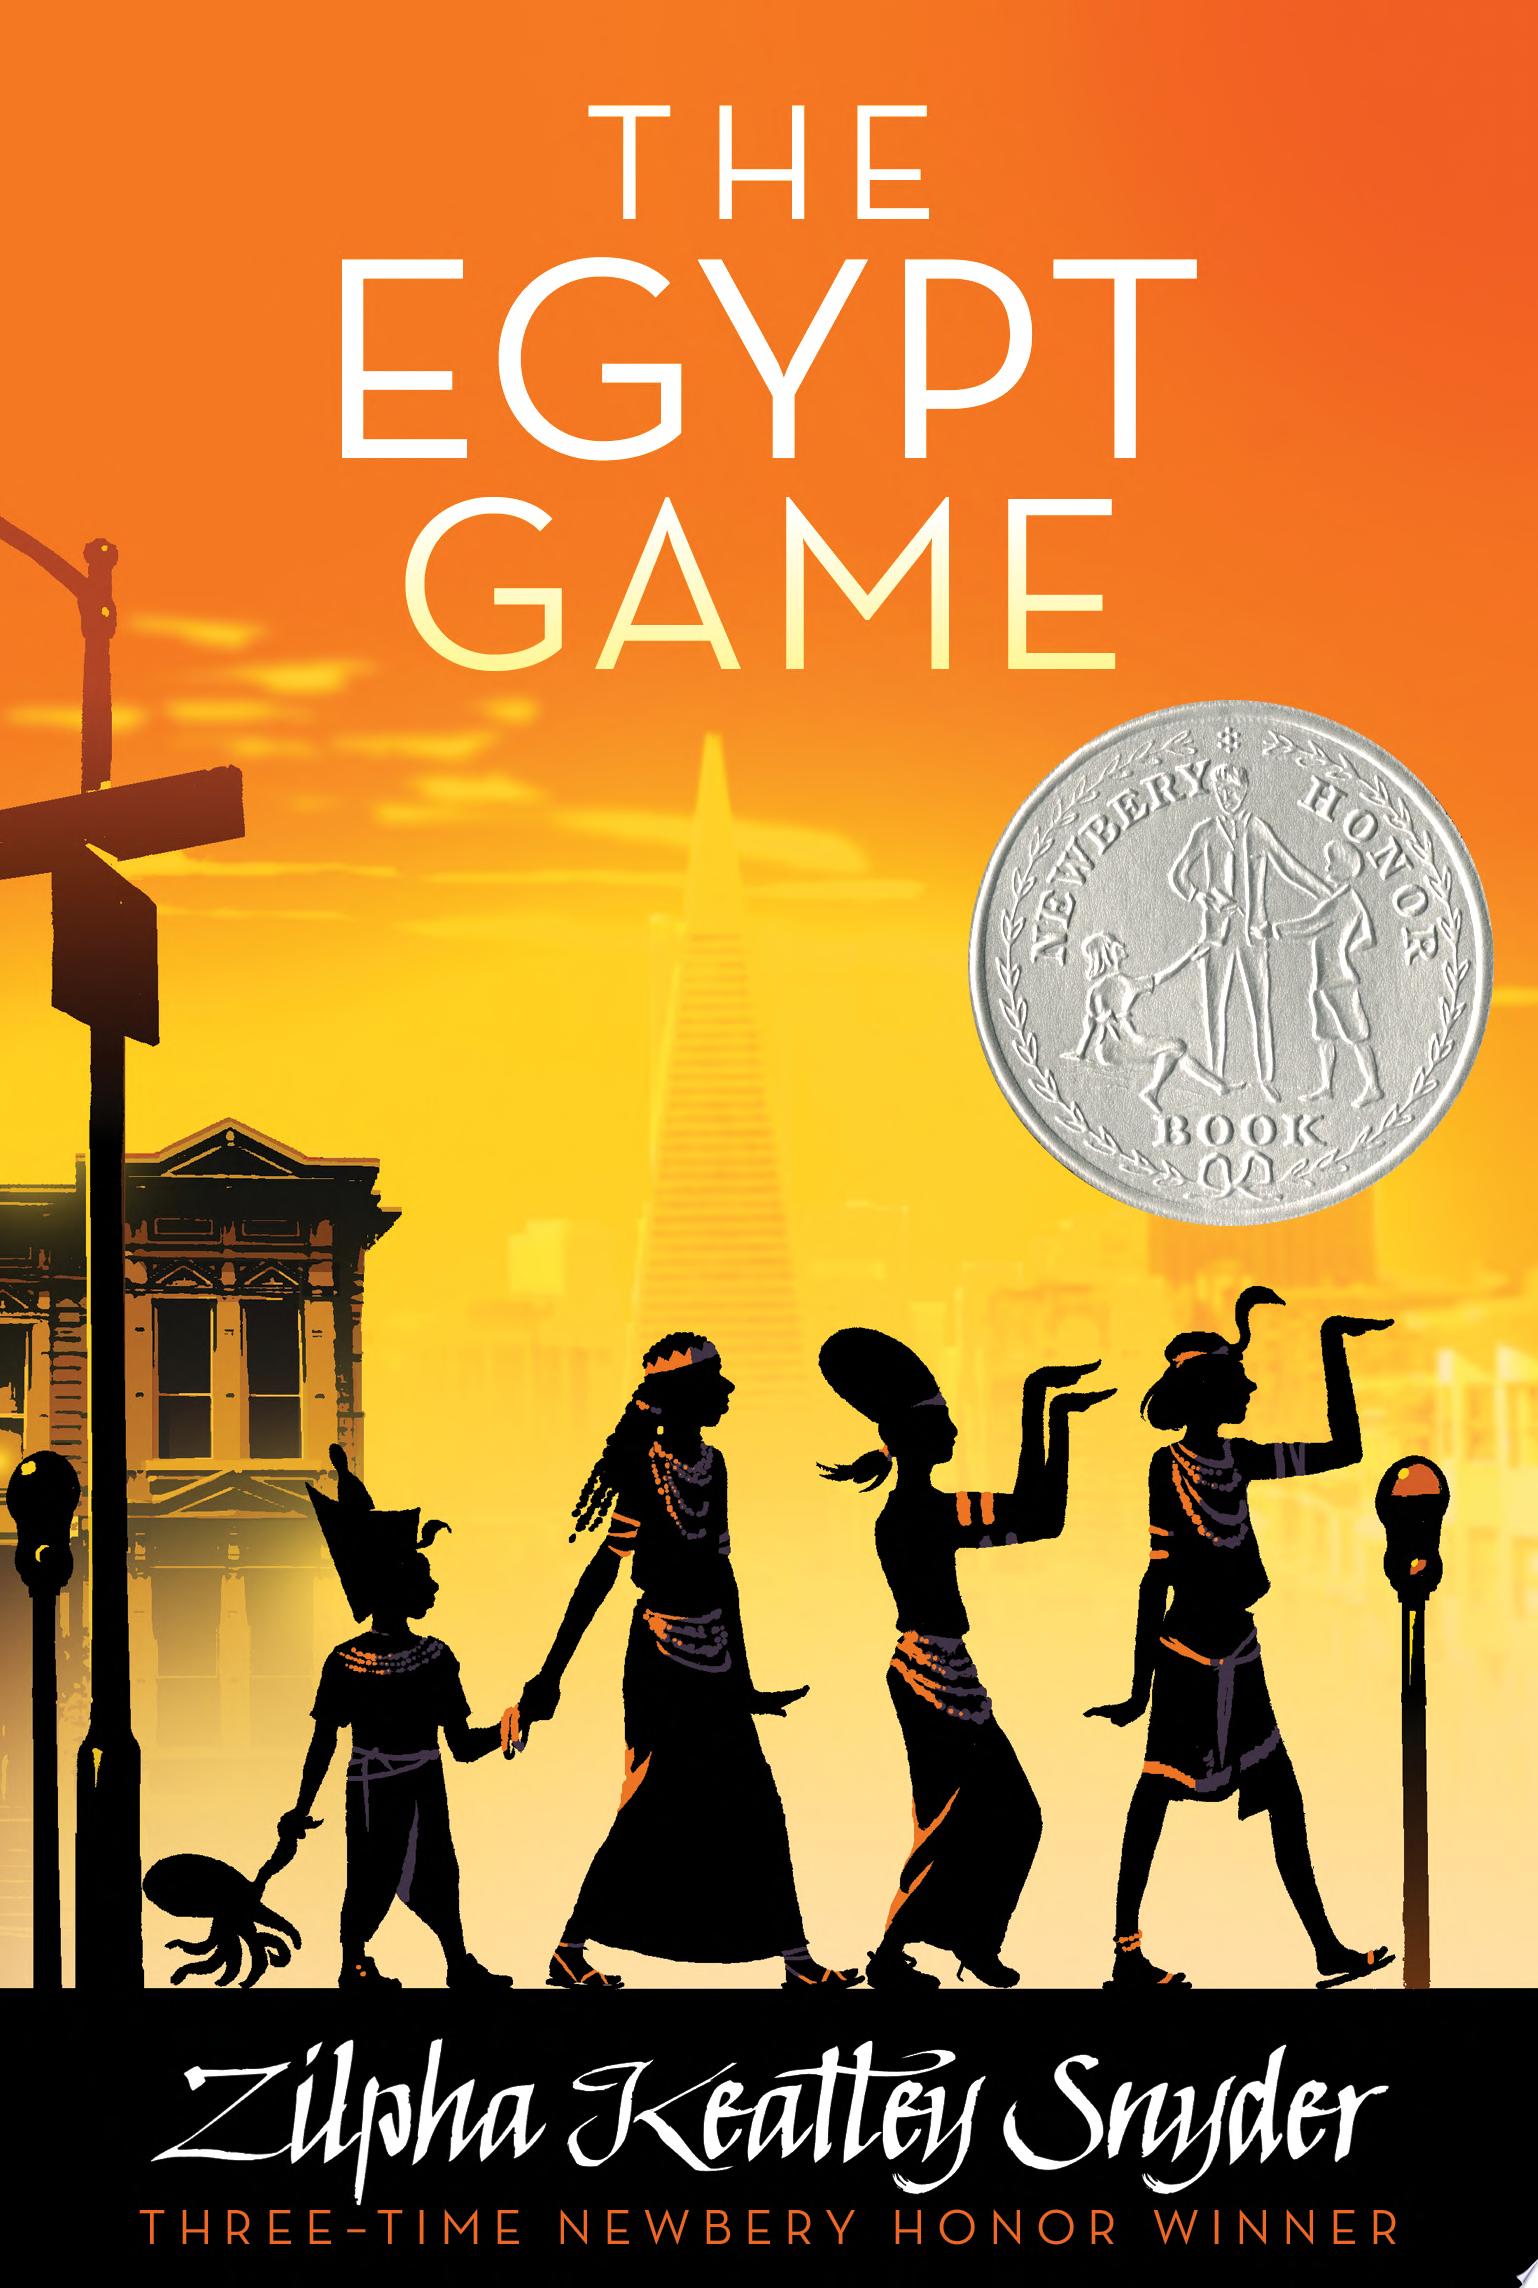 Image for "The Egypt Game"